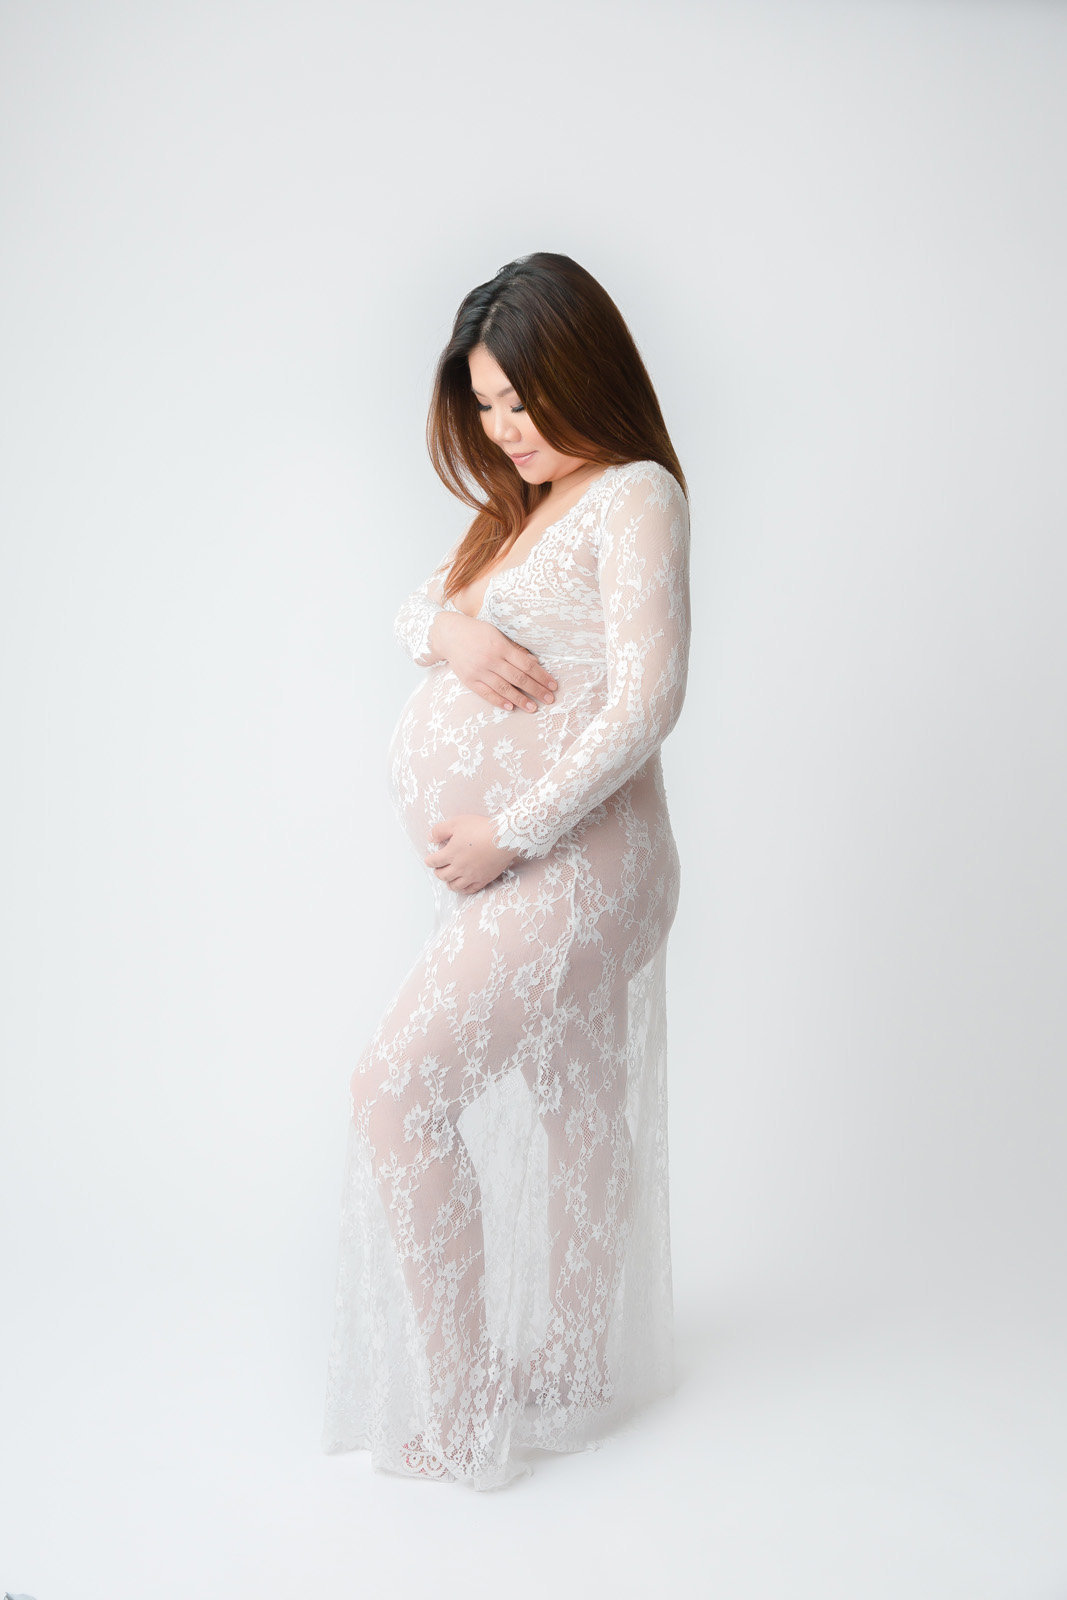 Vaughan-Maternity-Photography78